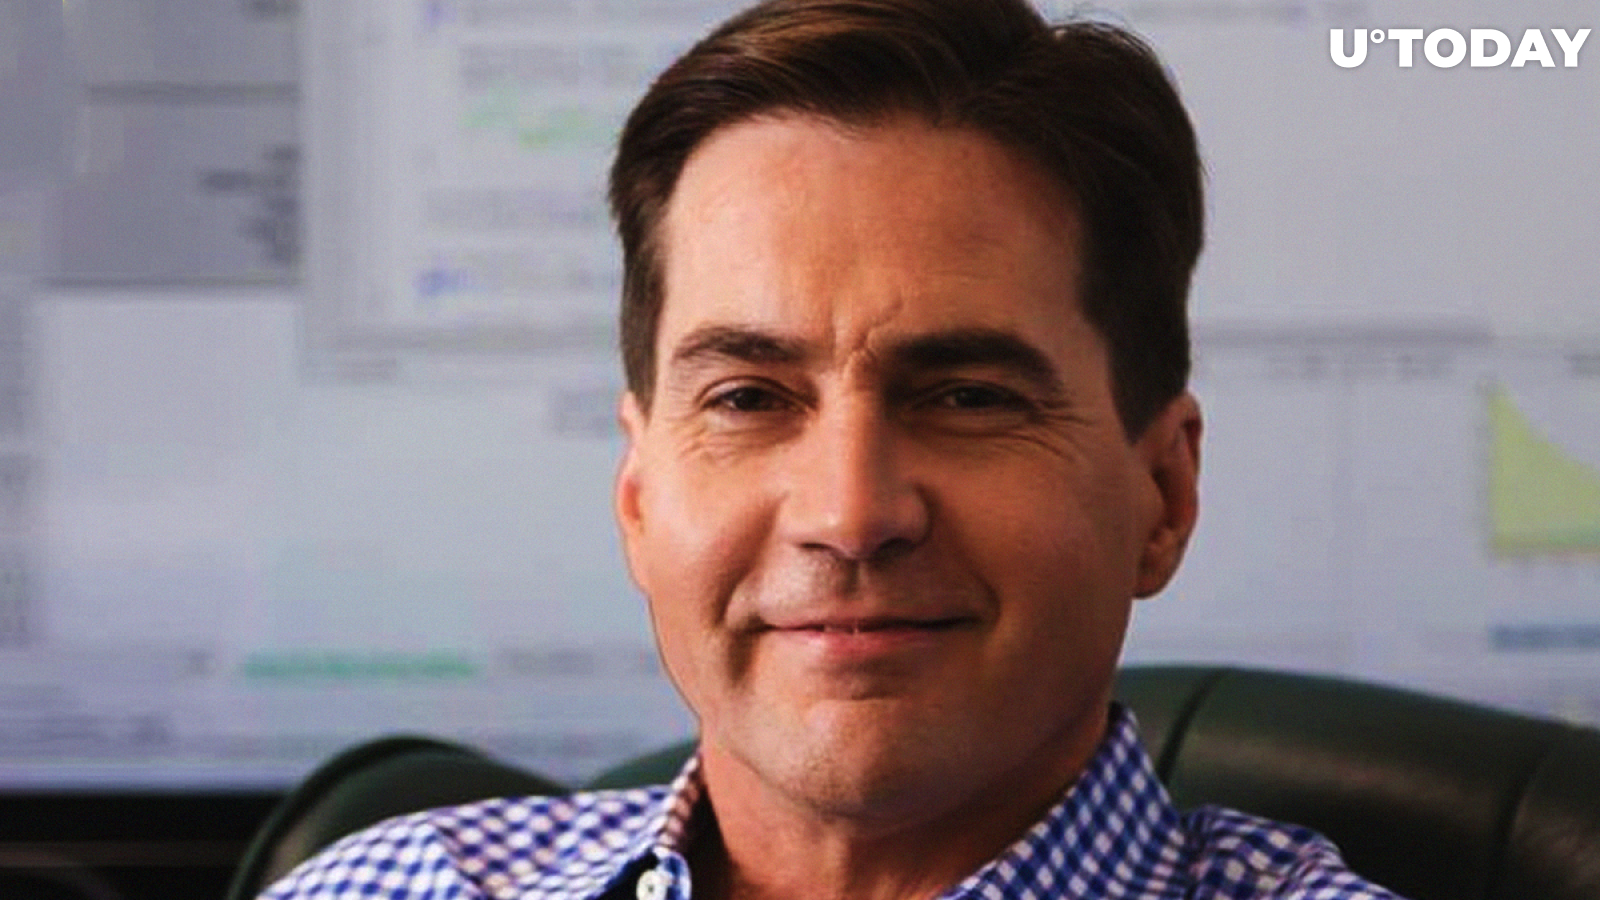 Craig Wright Says He Owns Rights to Bitcoin (BTC), Threatens Legal Action Against "CoreCoin" and Bitcoin Cash (BCH)